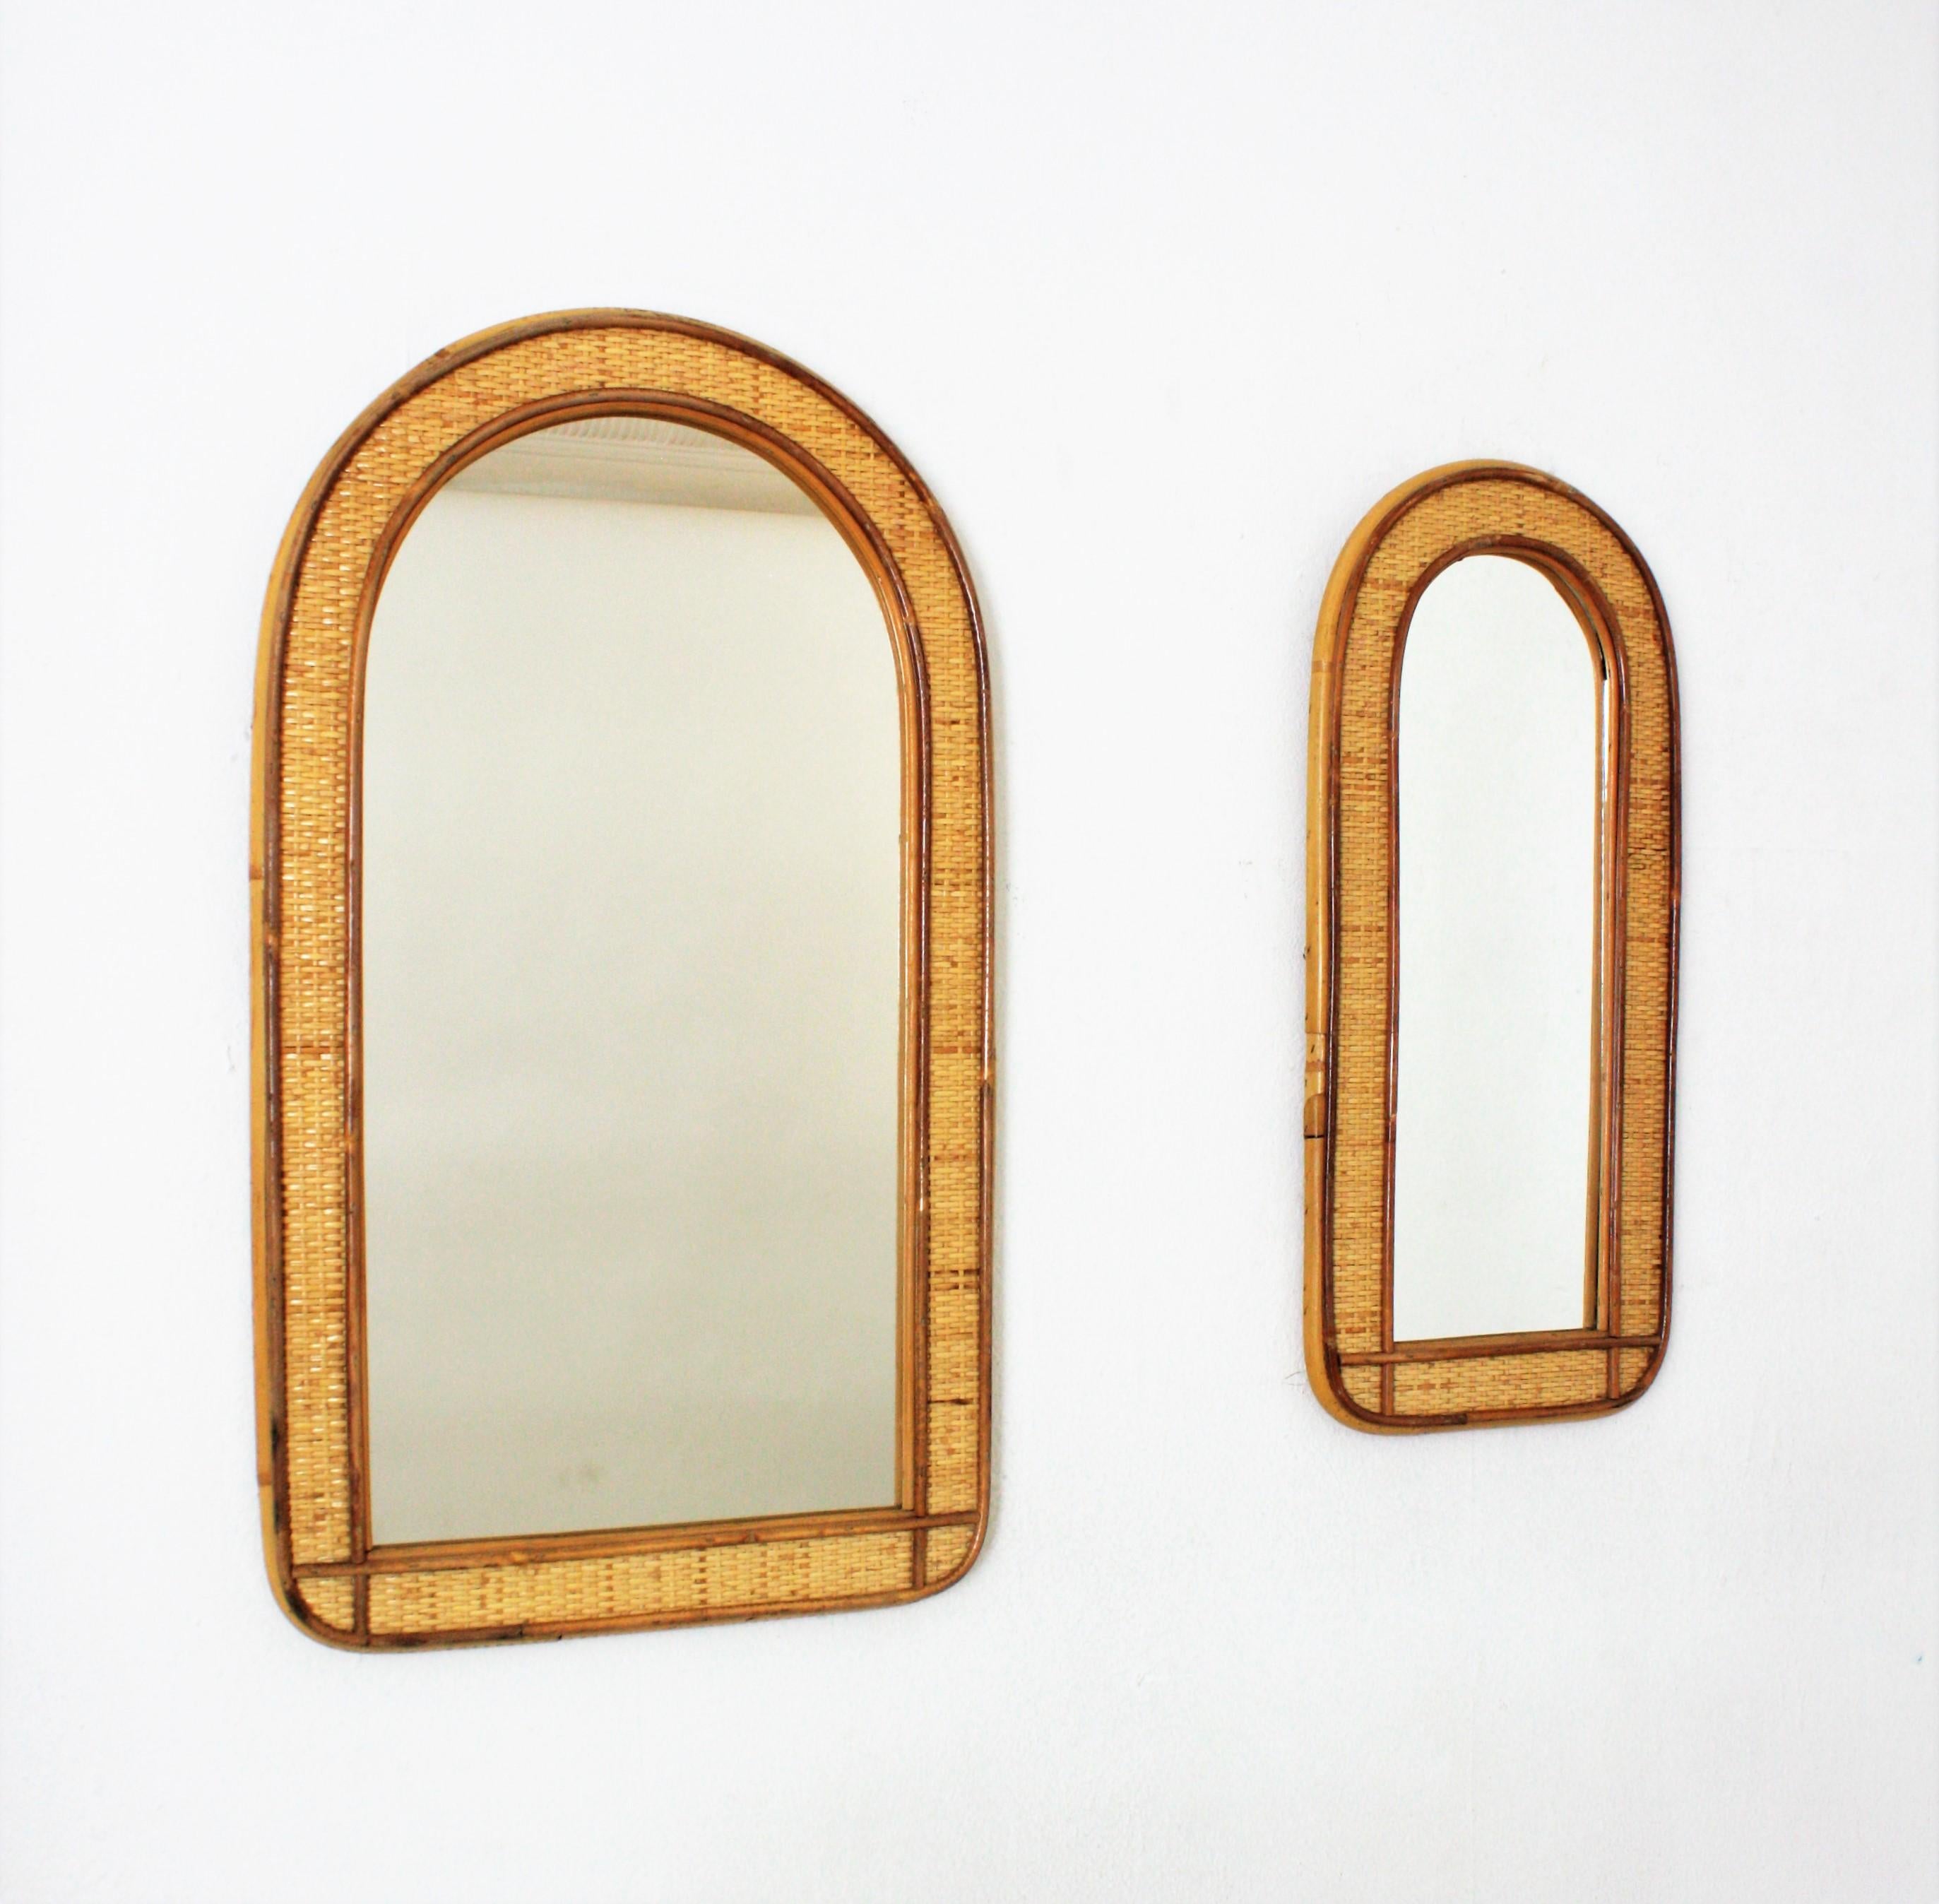 Rattan Woven Wicker Wall Mirror with Arched Top For Sale 2